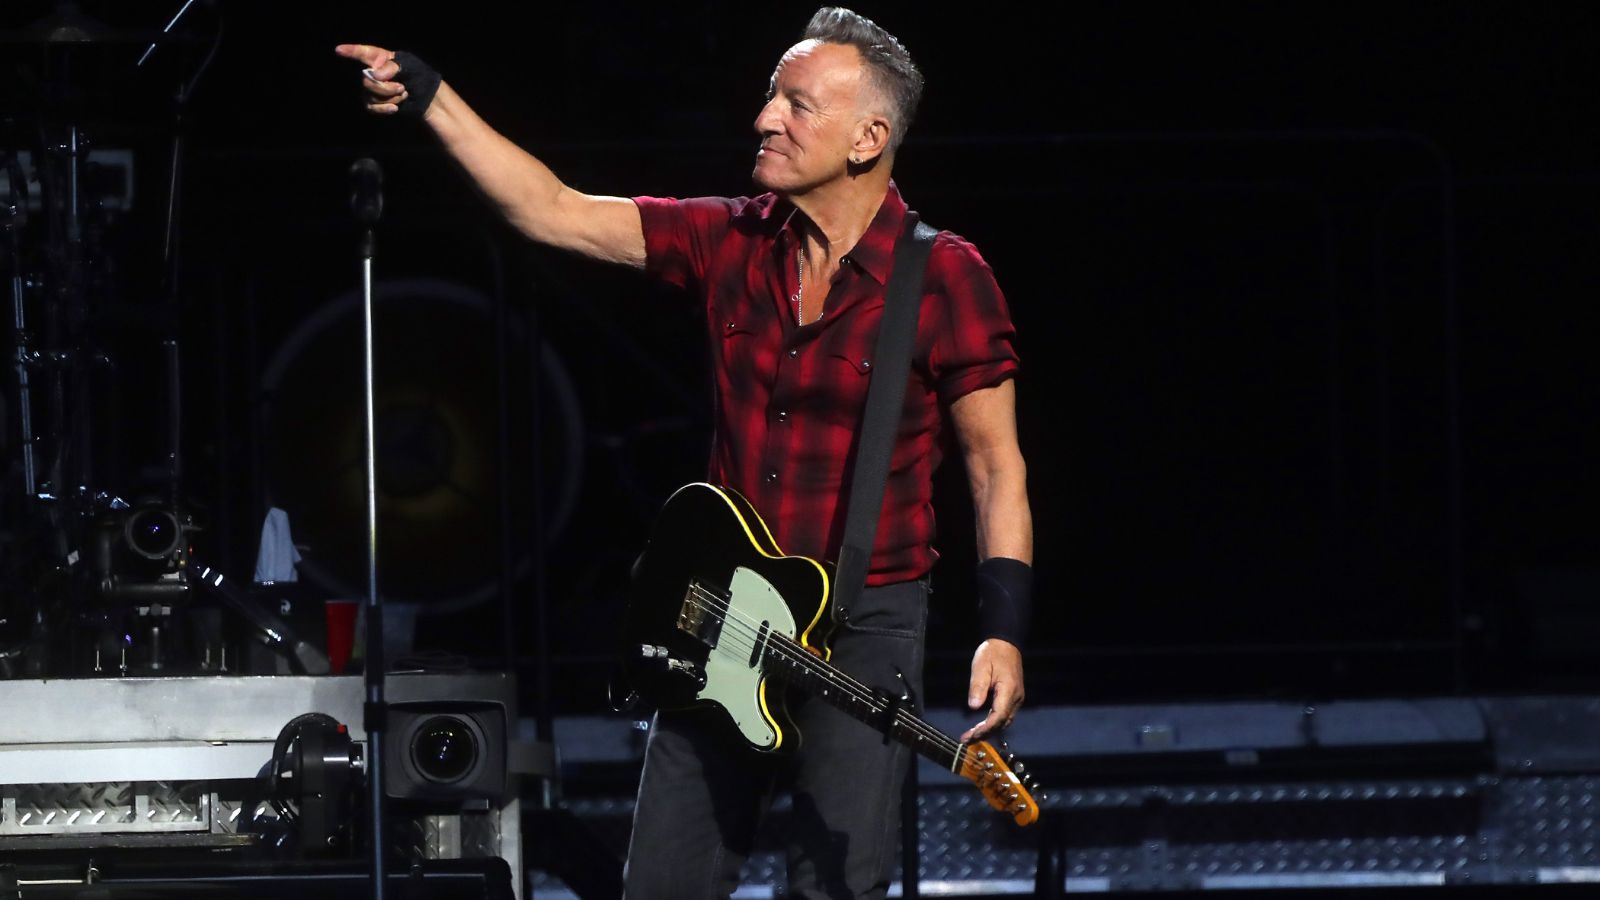 Bruce Springsteen fans raise $20K for St. Mary’s Food Bank during Phoenix concert